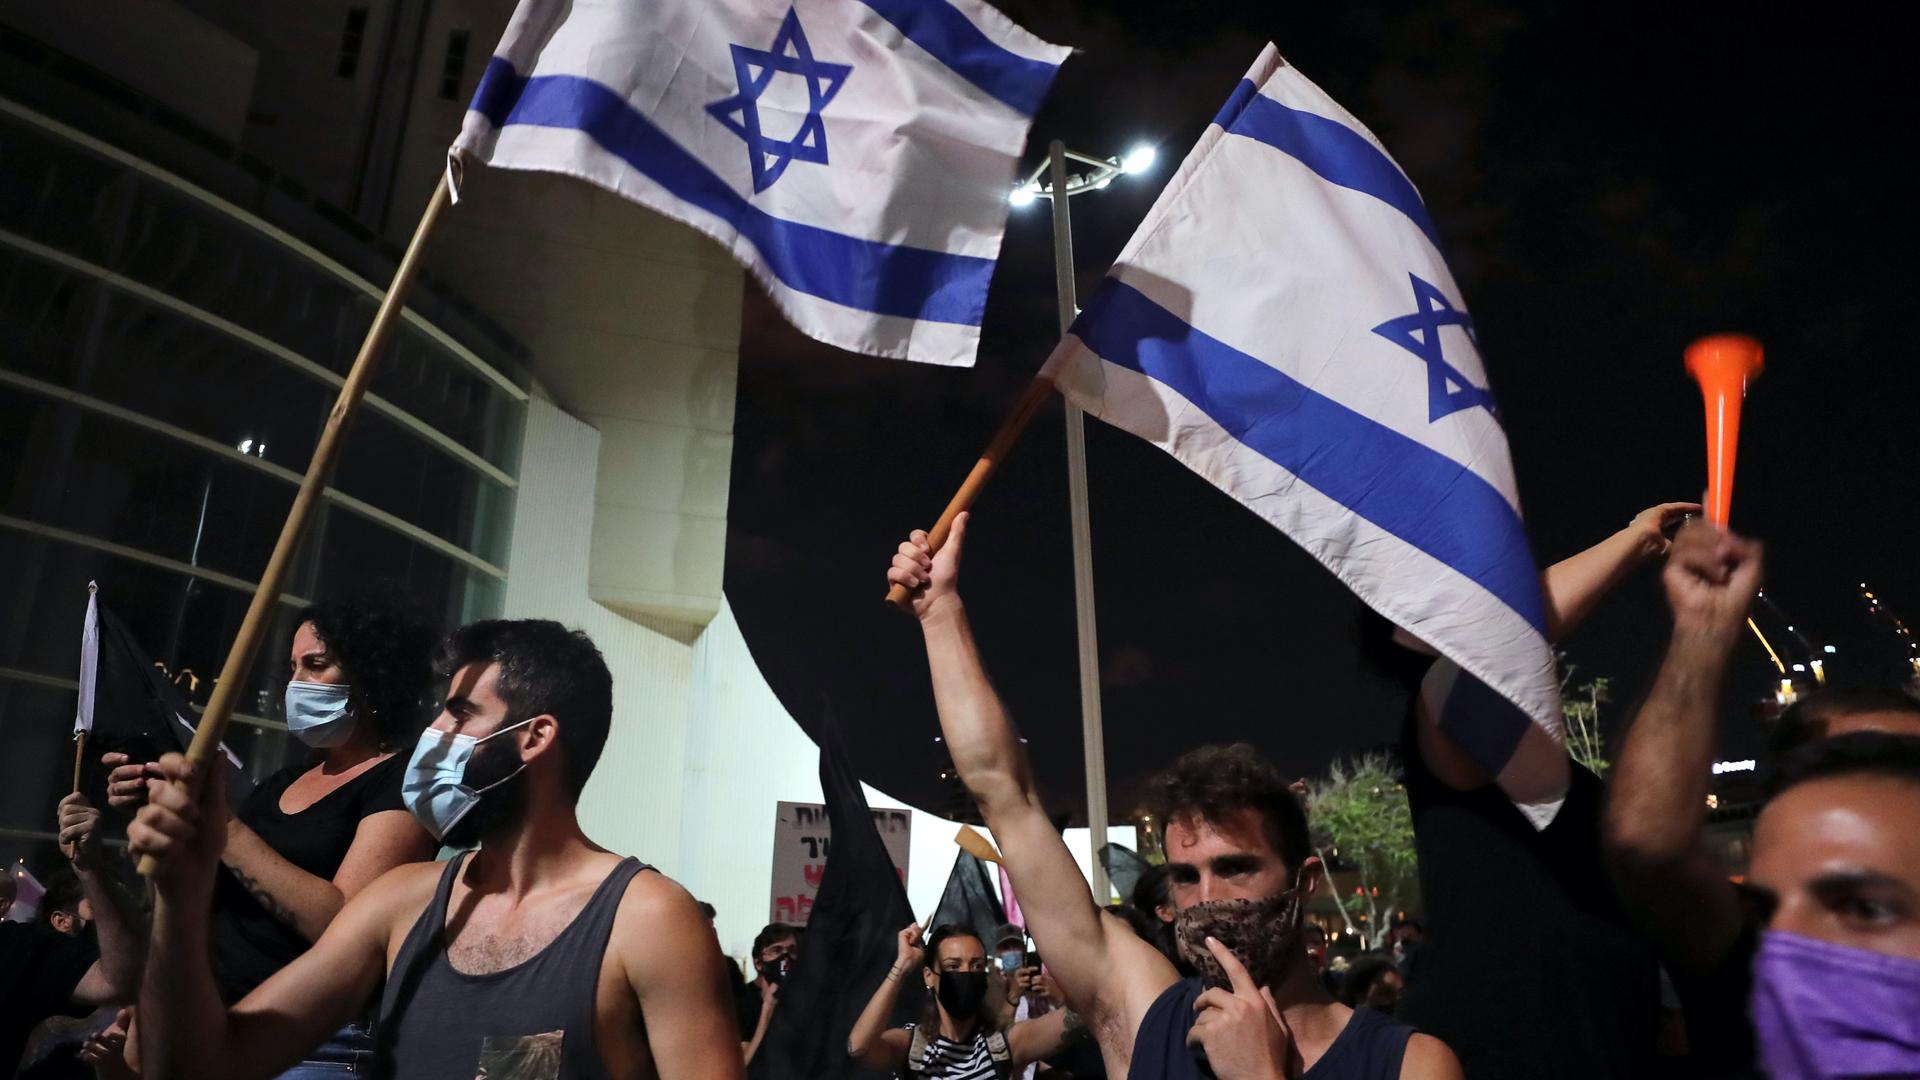 Two men wearing tank tops and face masks protest and wave blue and white Israeli flags in a big crowd